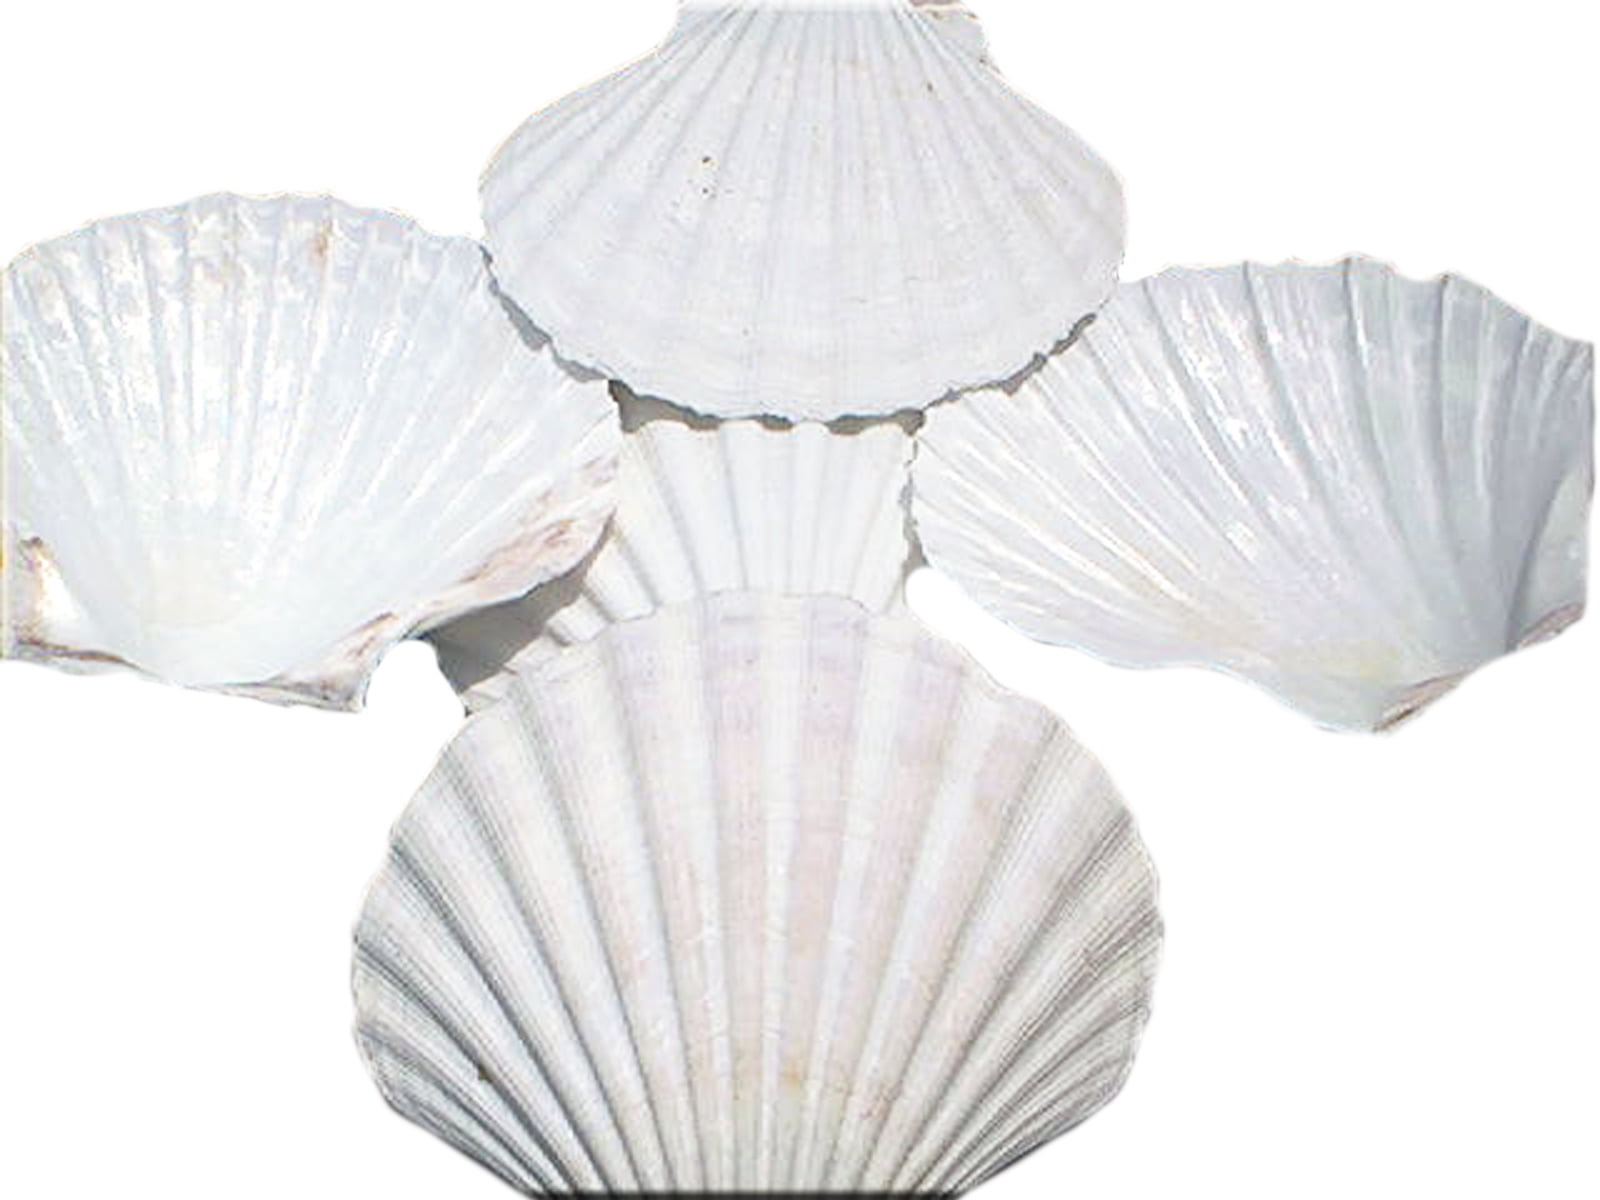 Set of 12 Large Real Baking Scallop Shells (4 - 4 3/8) for Cooking,  Baking, Serving Food Beach Crafts and Coastal Decor 